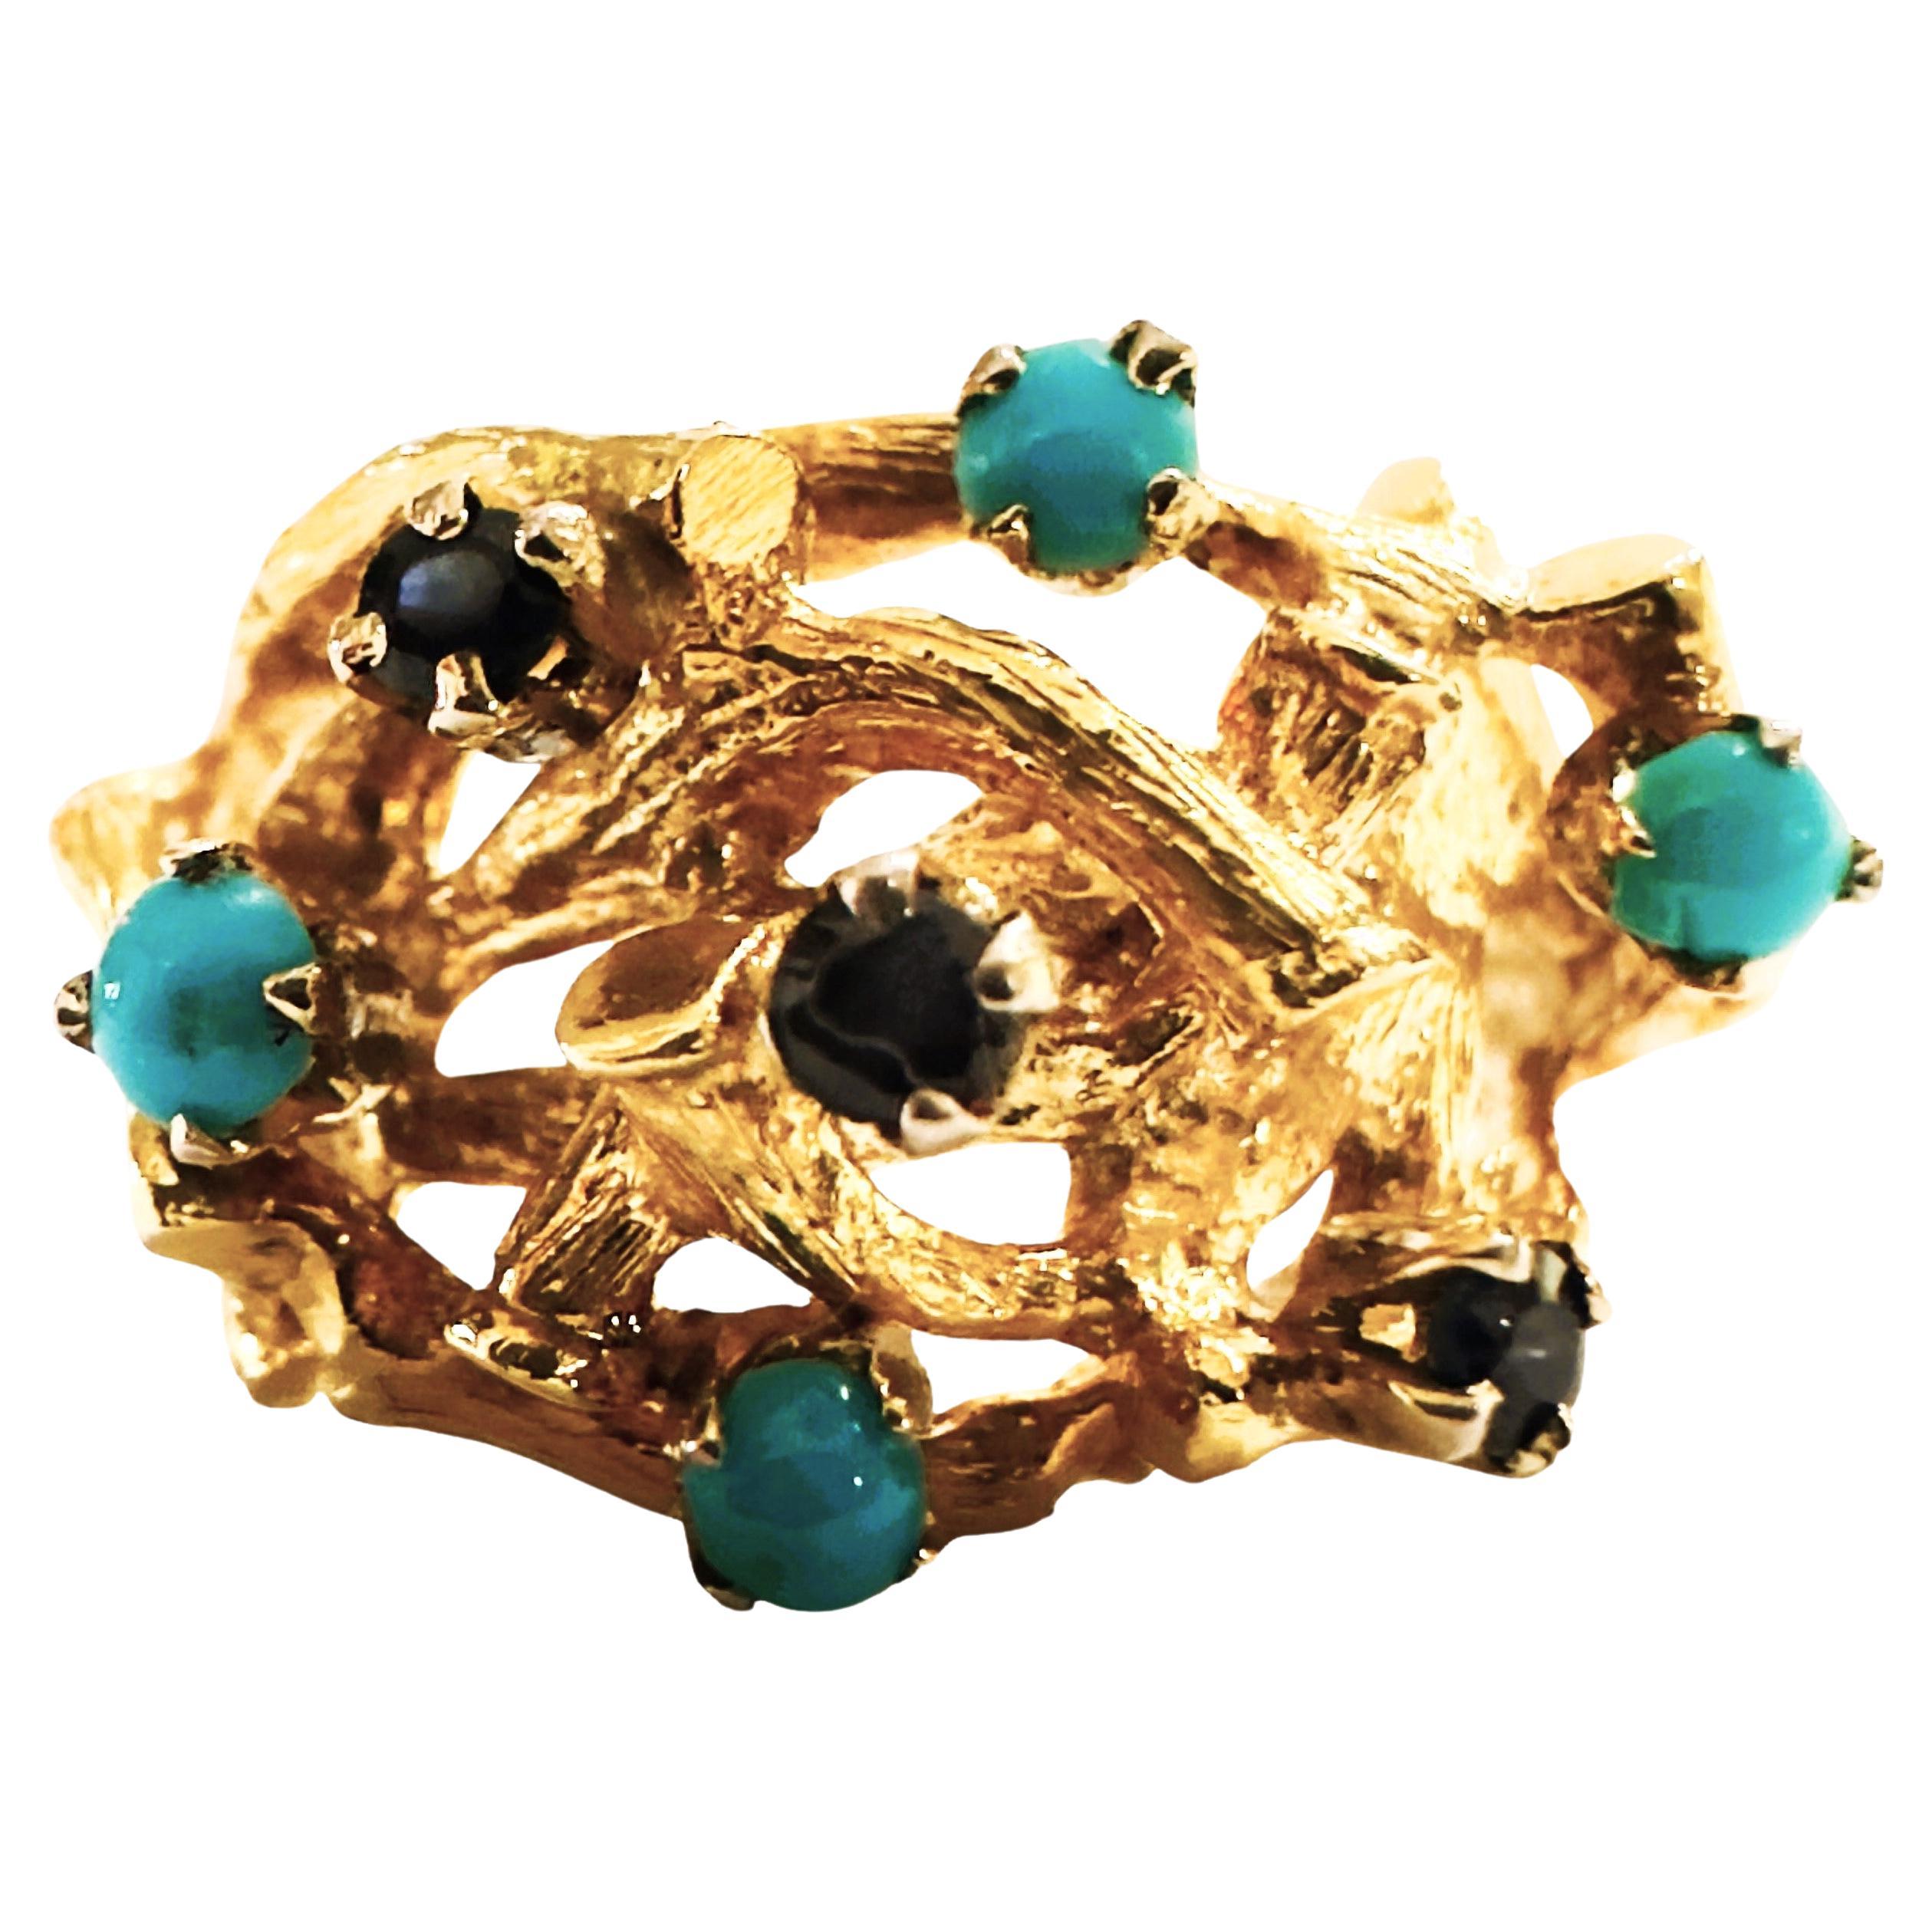 Vintage 14k Yellow Gold Woven Branch Ring with Sapphires & Turquoise